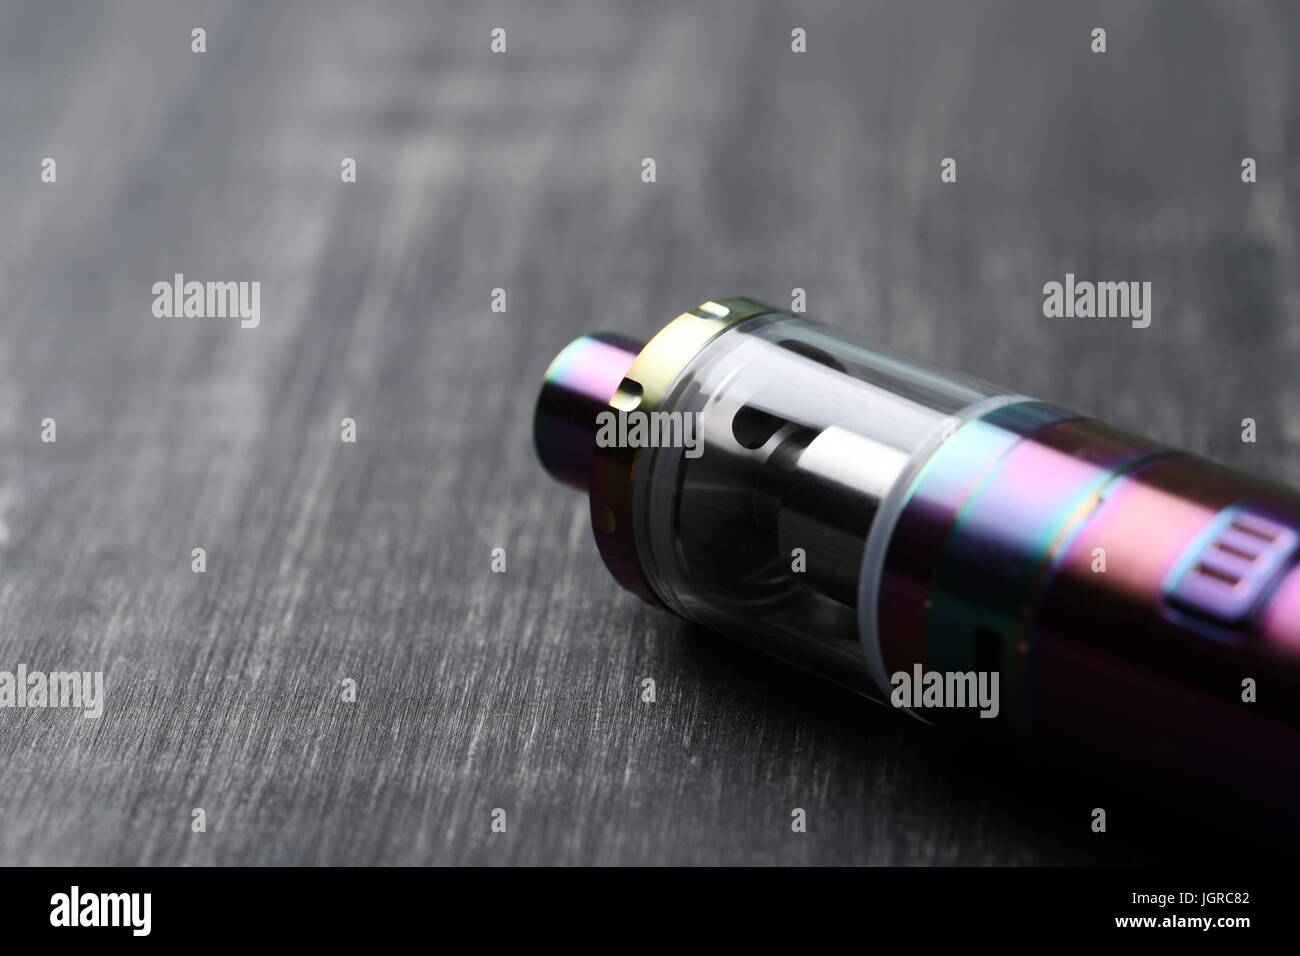 Vaping device on the wooden table Stock Photo